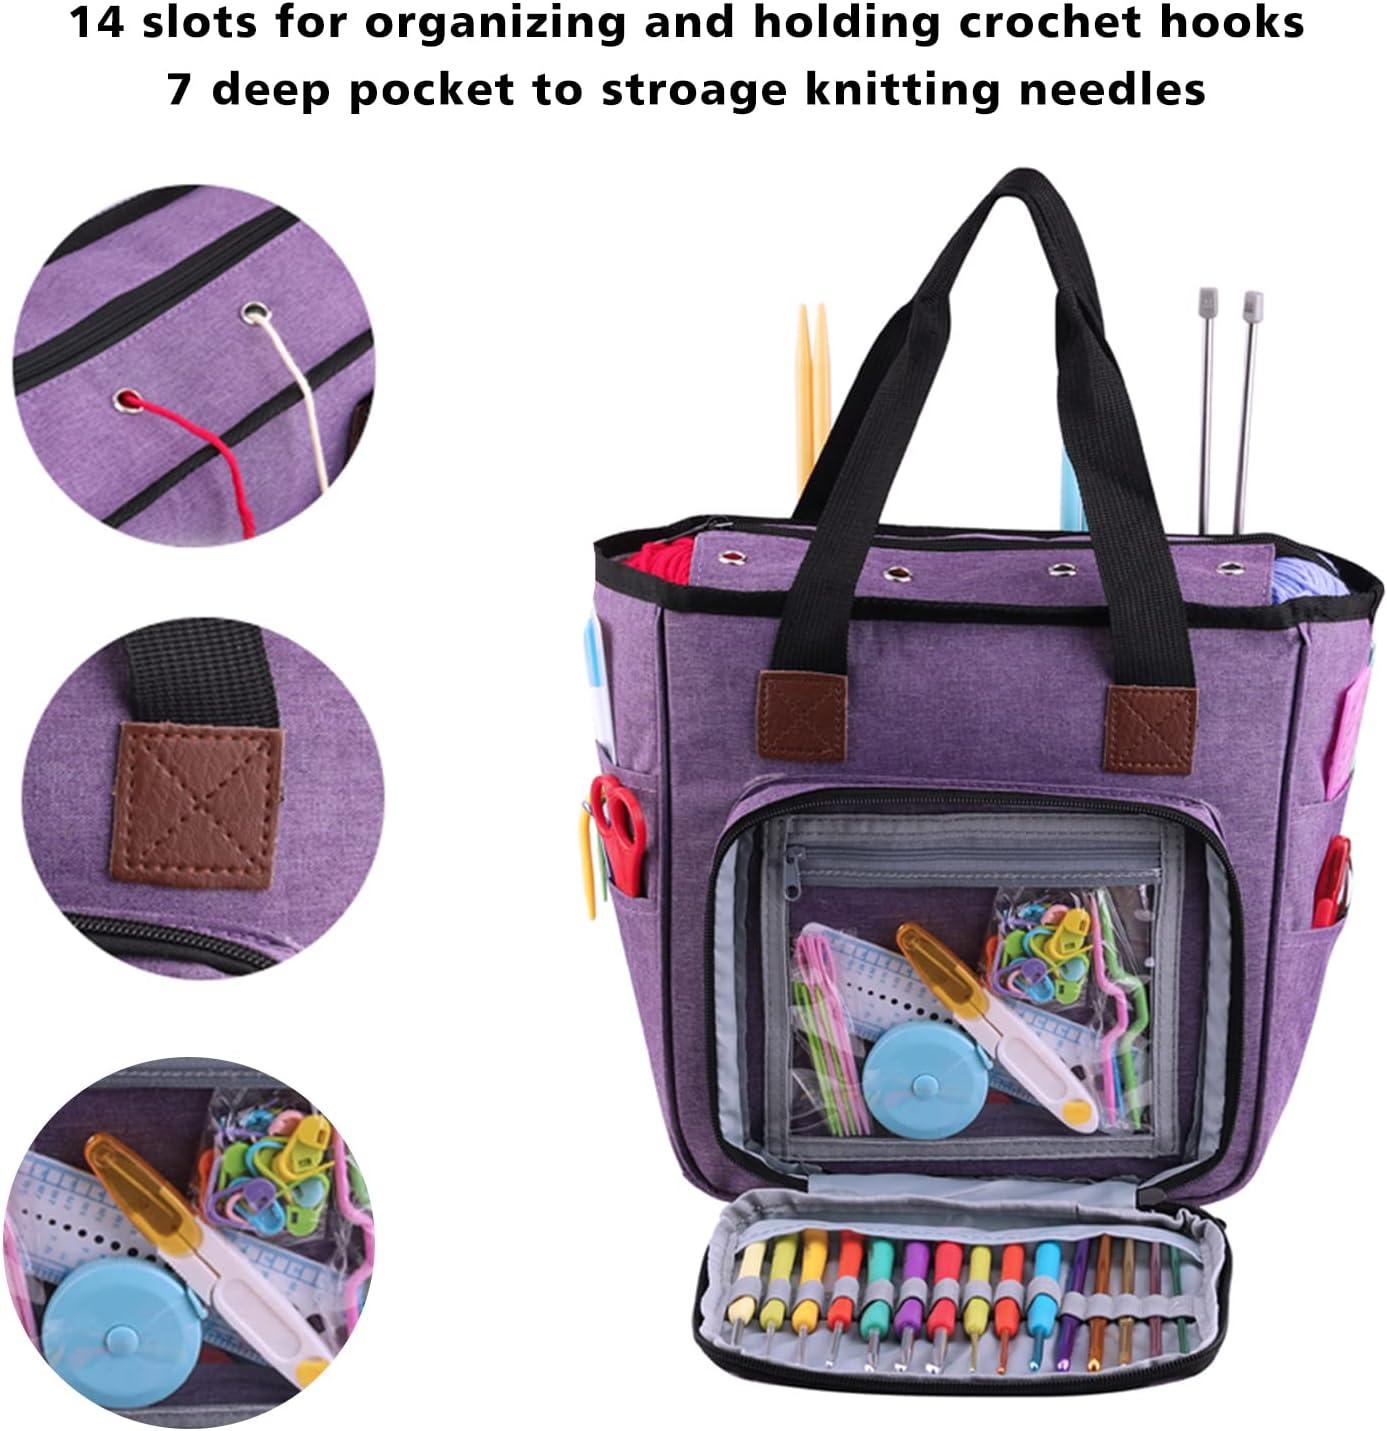 KOKNIT Knitting Tote Project Bag, Portable Carry on Knitting Yarn Storage Bag with Pockets for Crochet Hooks, Knitting Needles and Accessory